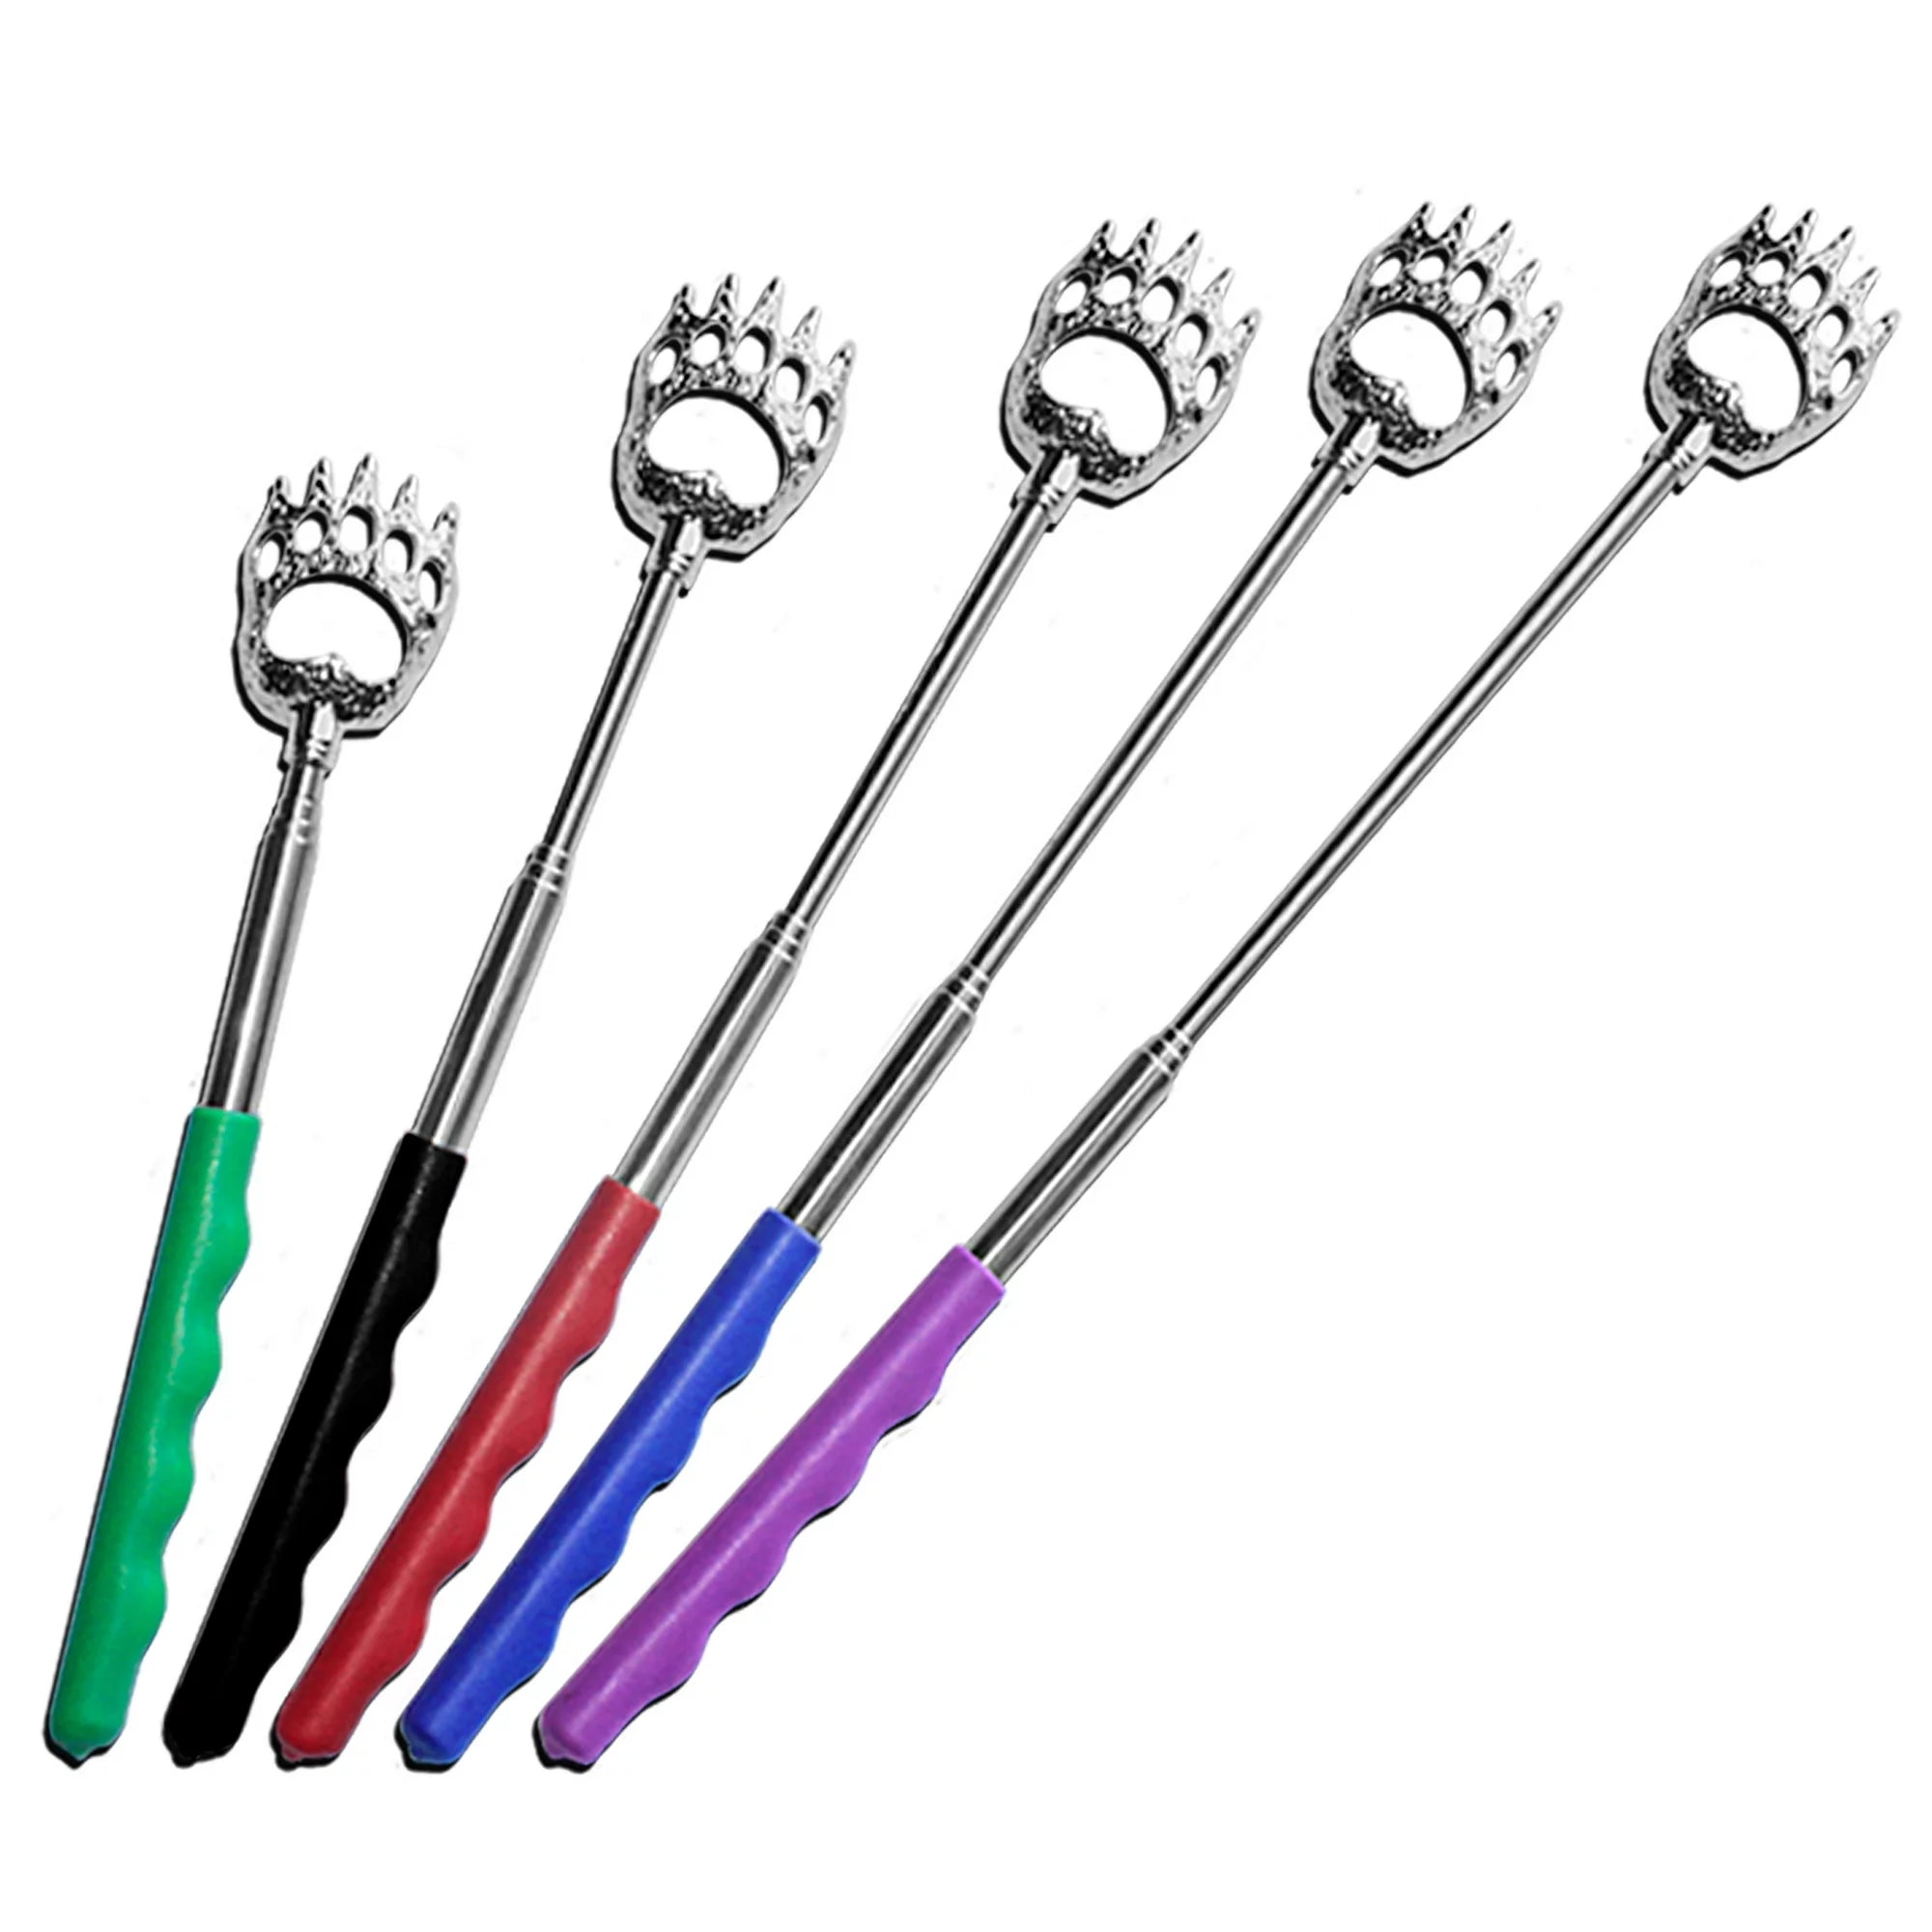 Portable Telescopic Back Scratcher Stainless Steel Bear Claw Rubber Handle Relieve Body Itching